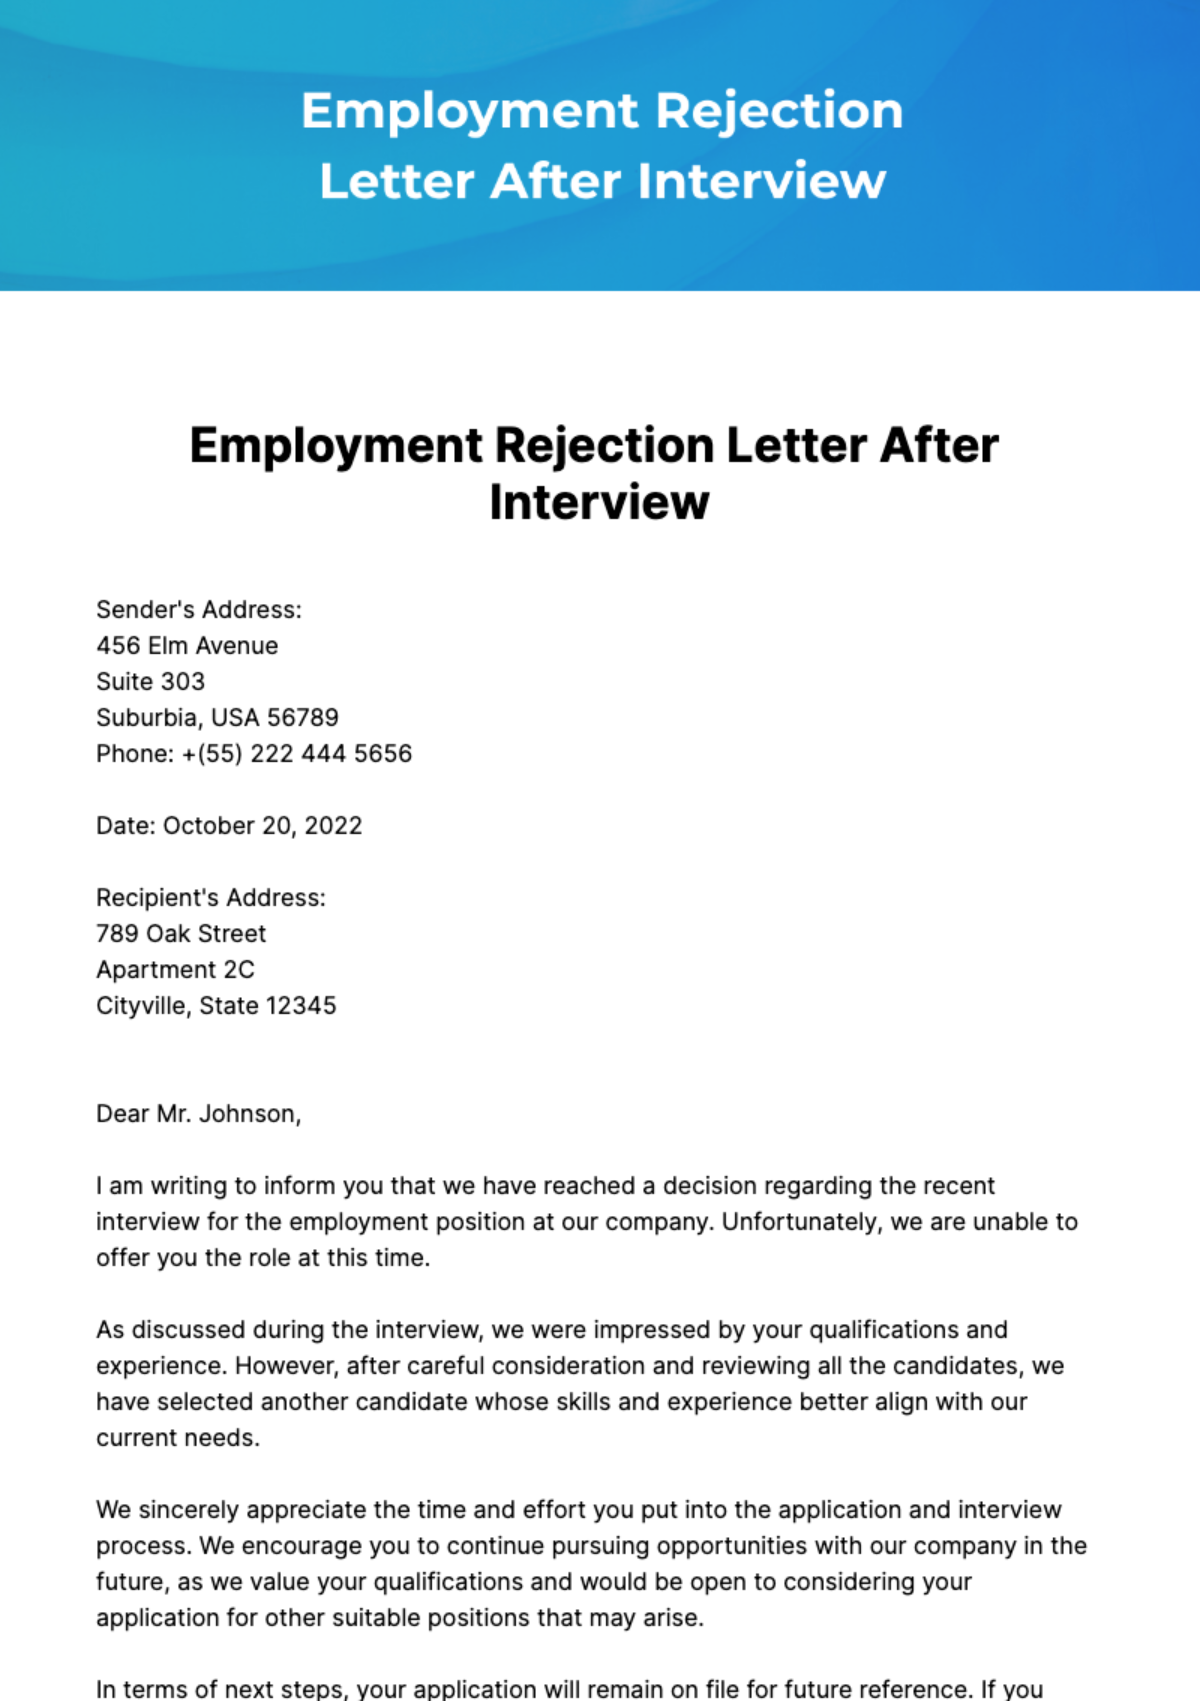 Employment Rejection Letter After Interview Template